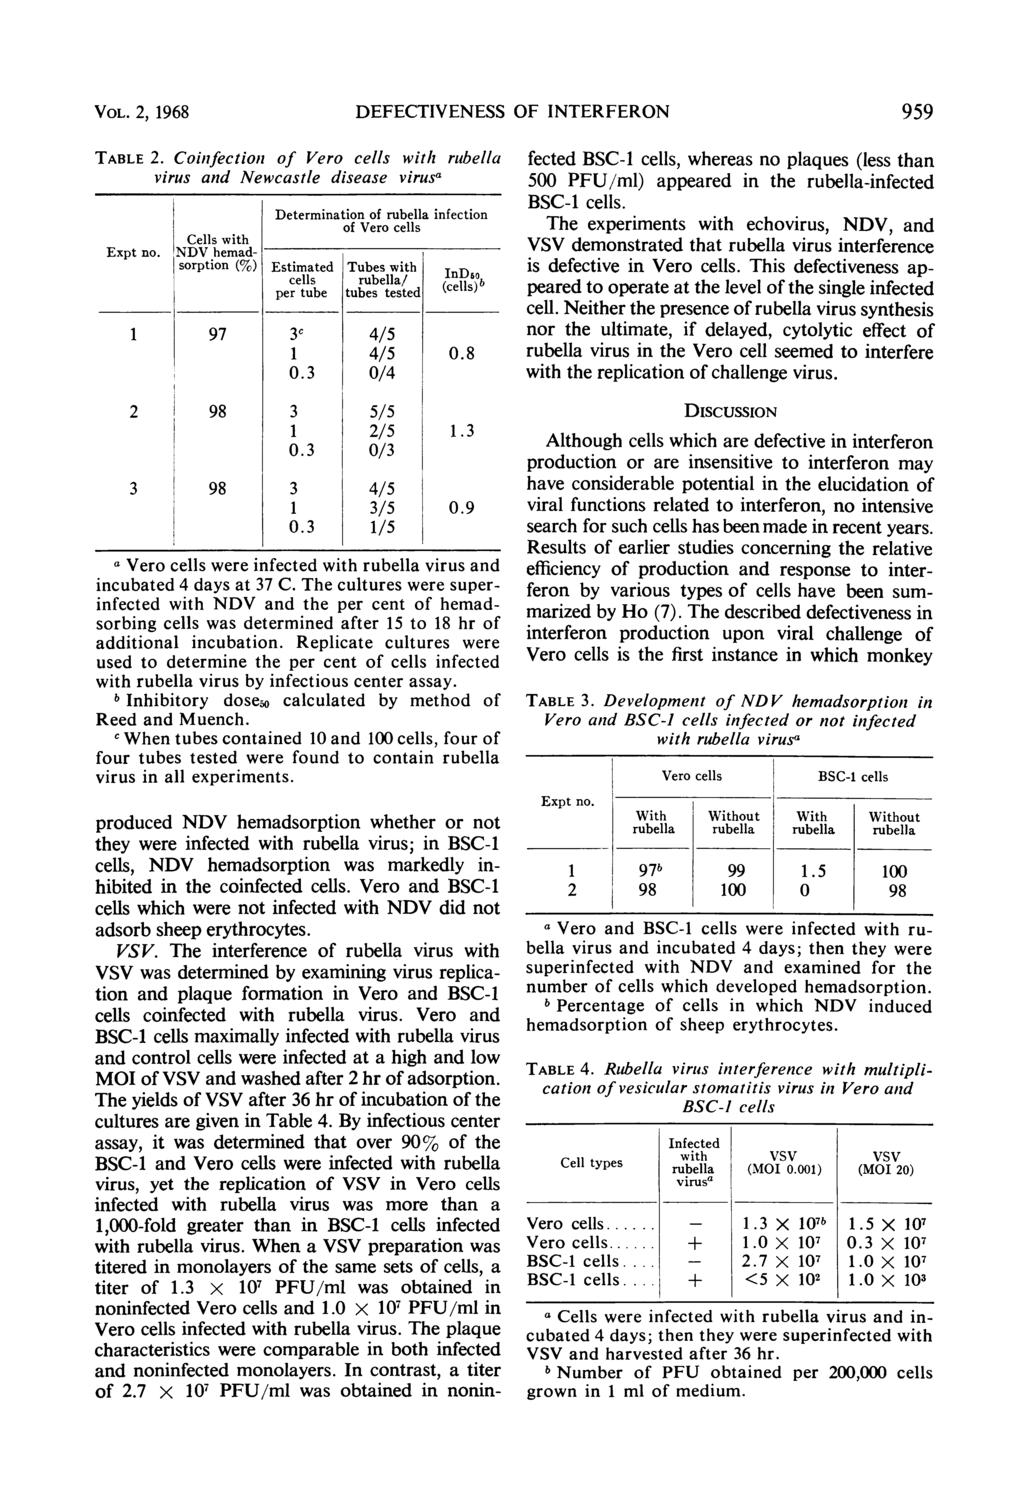 VOL. 2, 1968 DEFECTIVENESS OF INTERFERON 959 TABLE 2. Coinfectionz of Vero cells with rubella virus and Newcastle disease virusa Expt no.